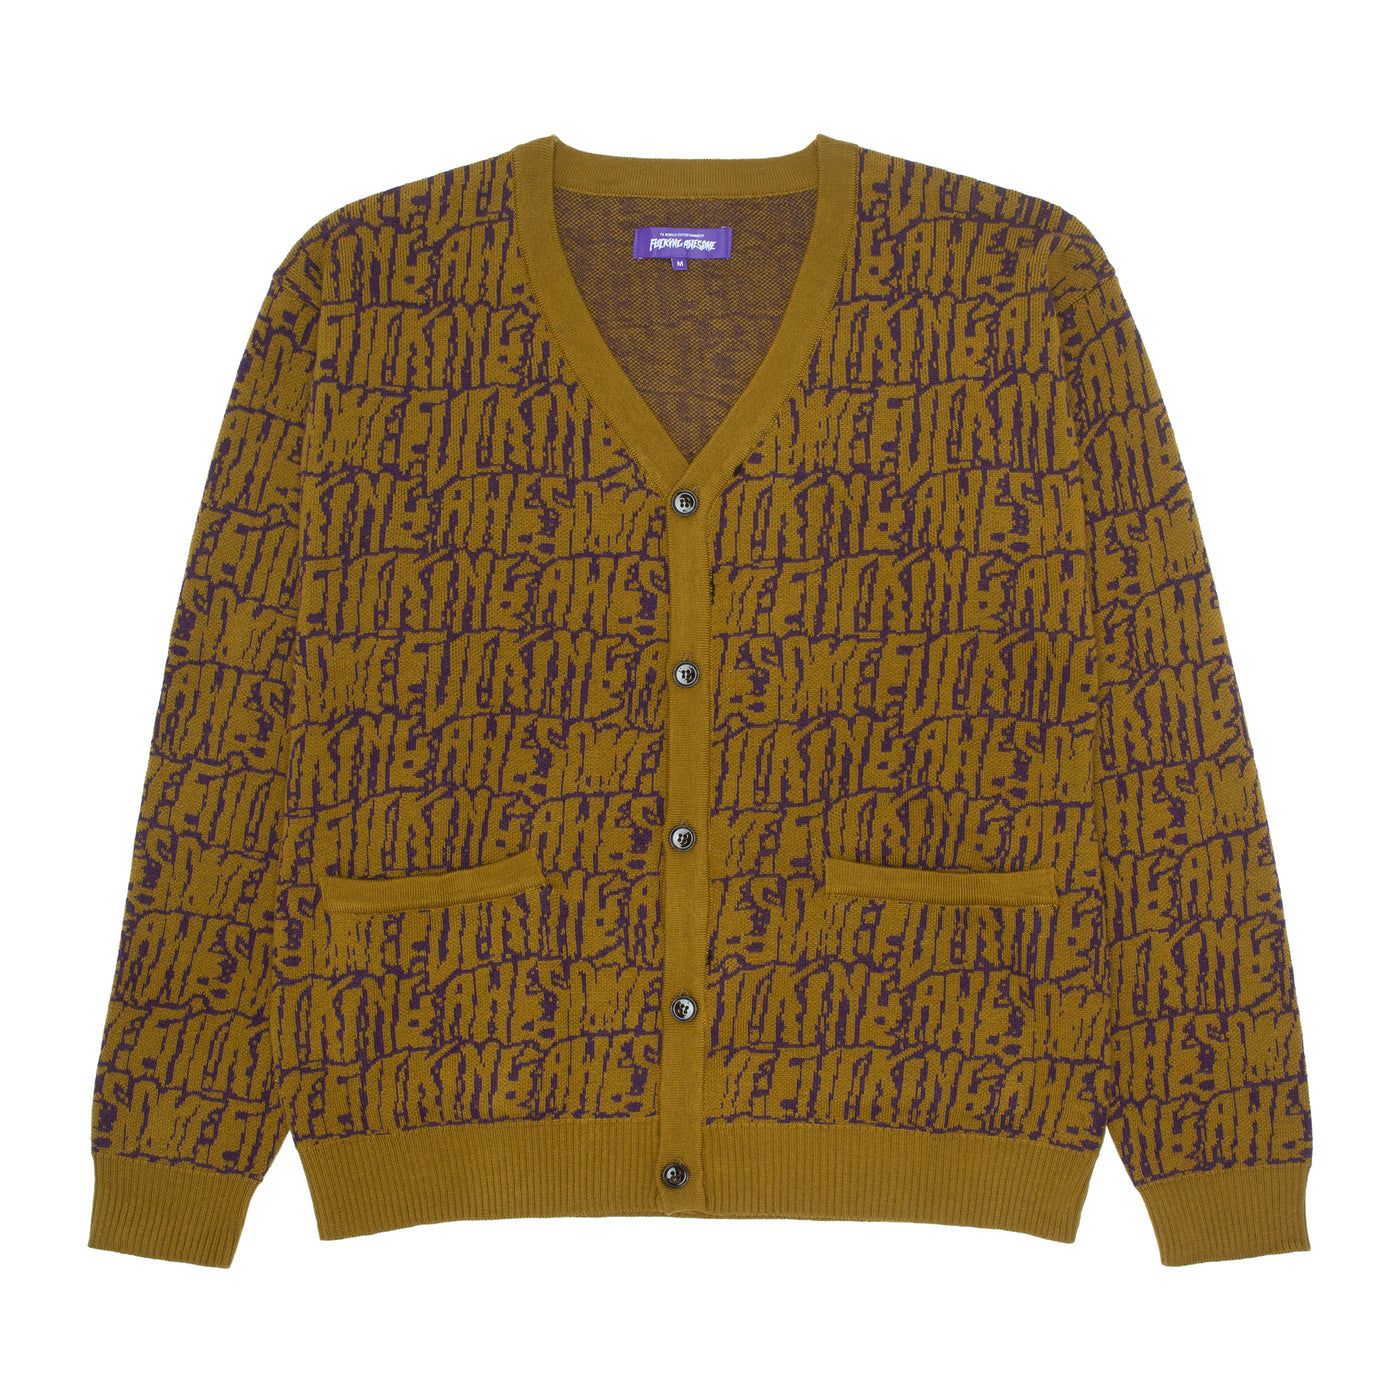 Stretched Stamp Logo Cardigan SwATER OLV/NVY (SIZE OPTIONS LISTED